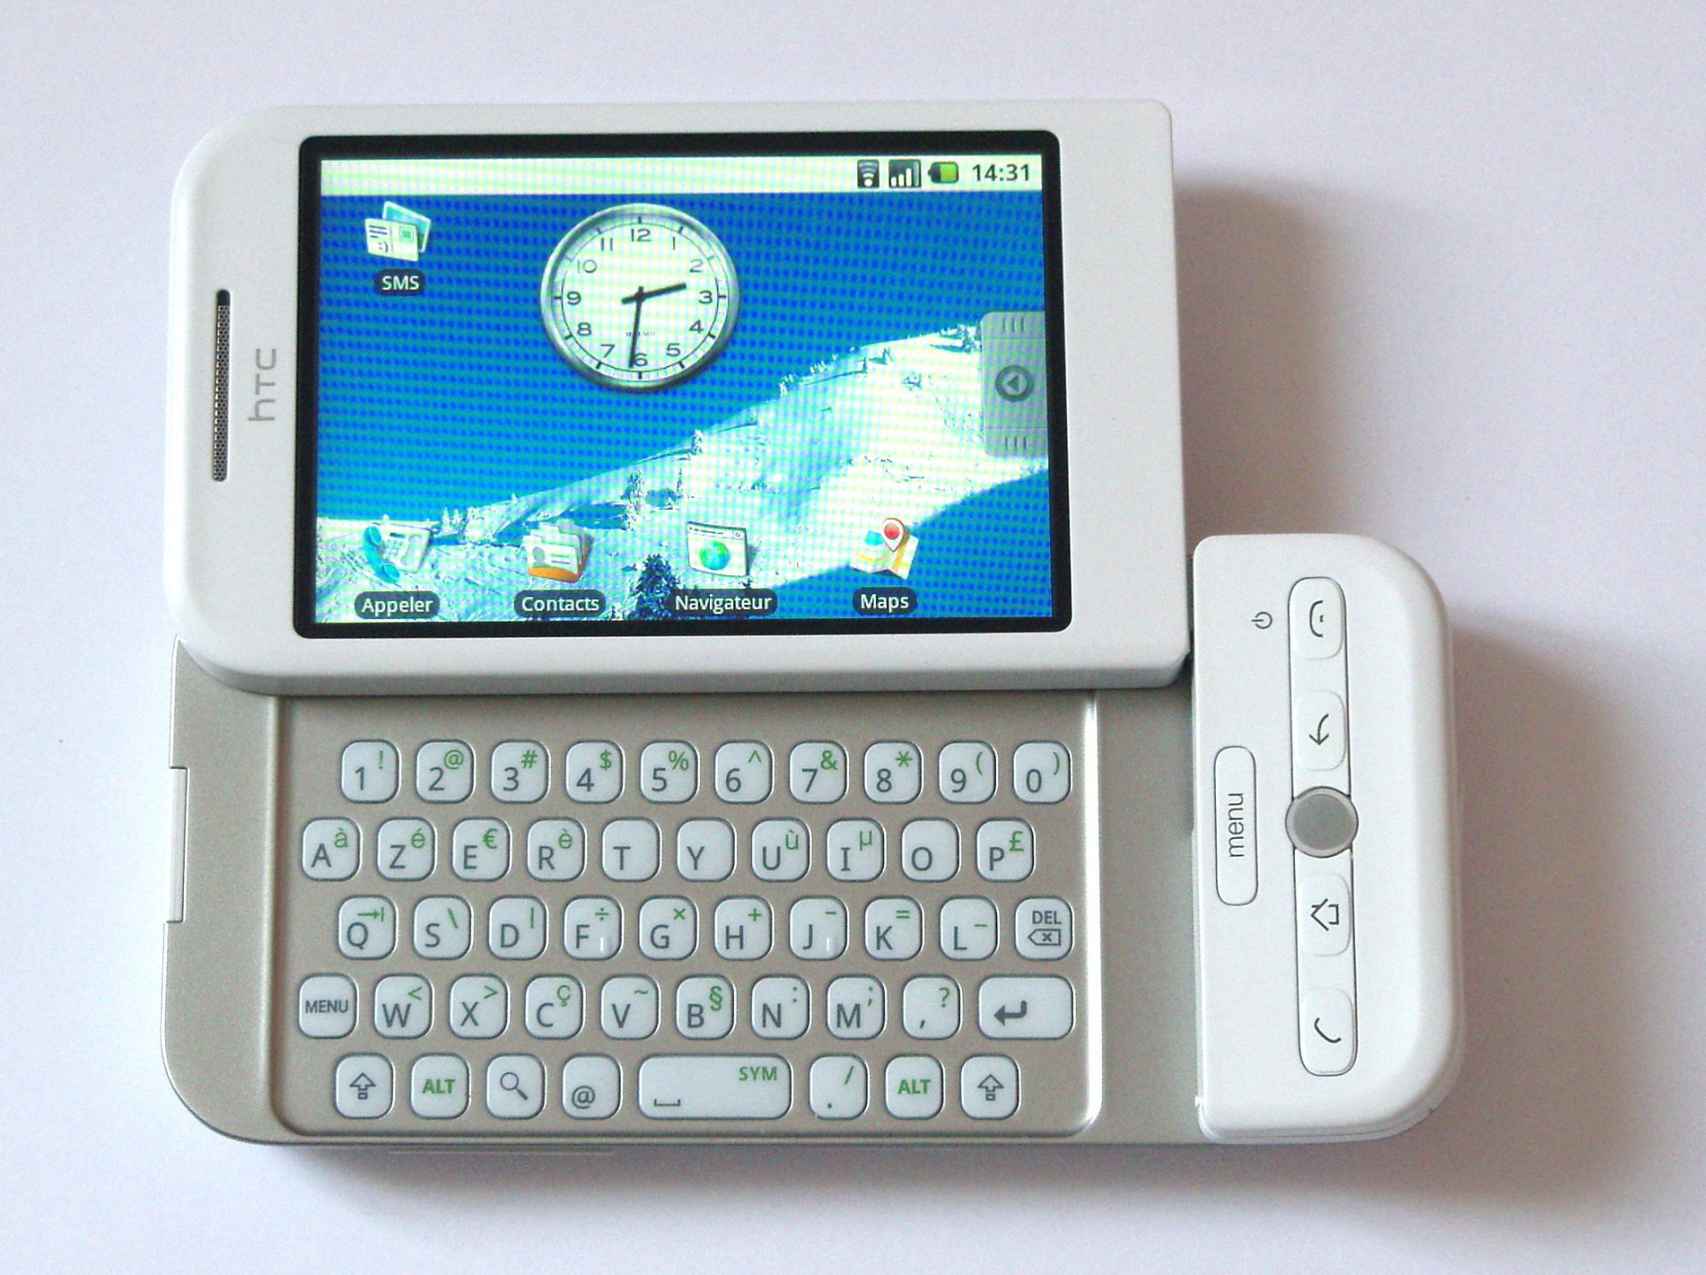 It was the HTC Dream, it marks the 7th anniversary of the first Android